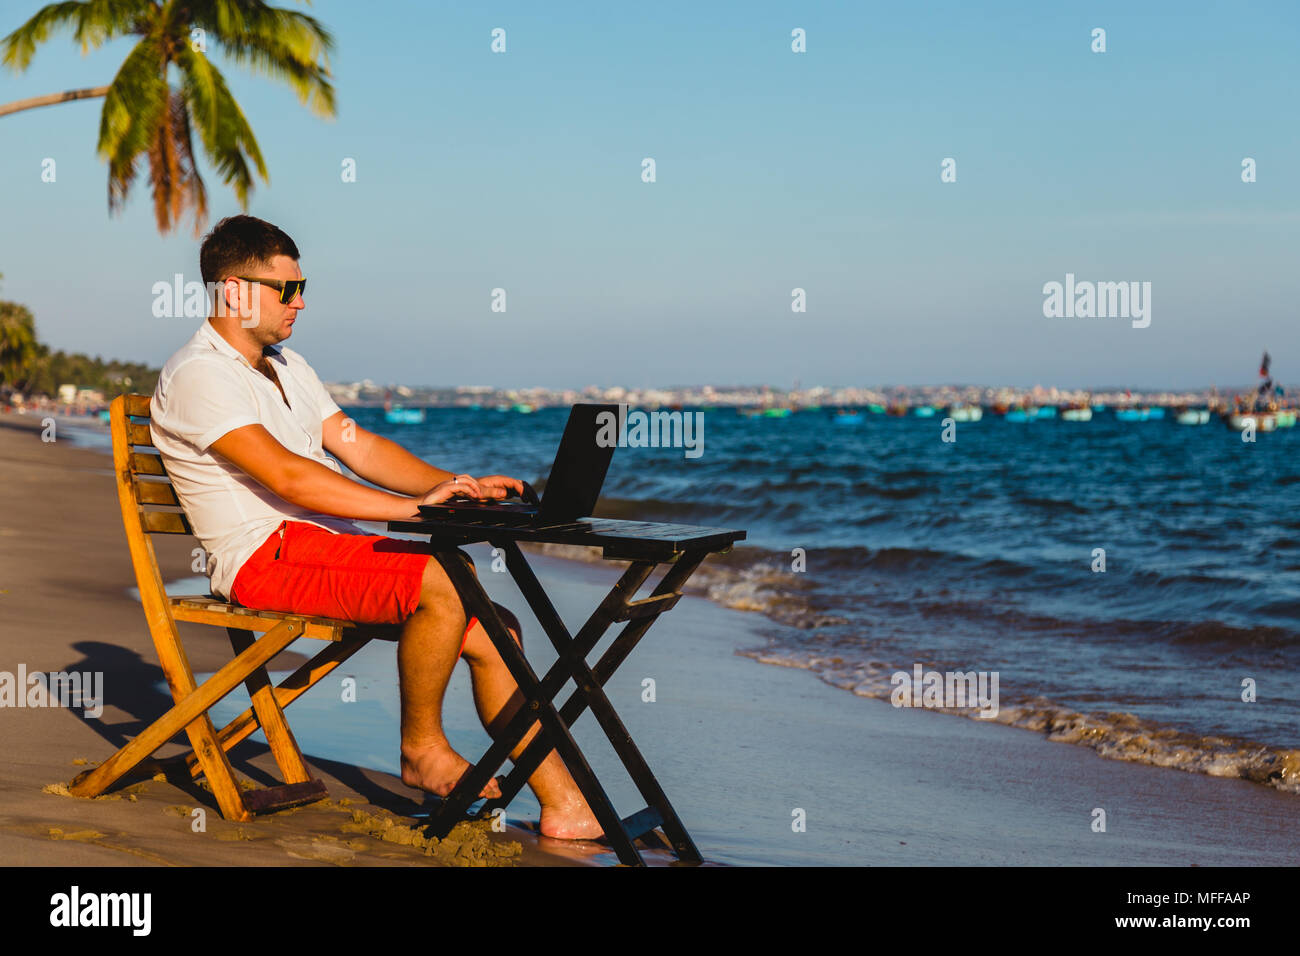 Man working with a laptop, on a hammock in the beach. Concept of digital nomad, remote worker, independent location entrepreneur. Stock Photo